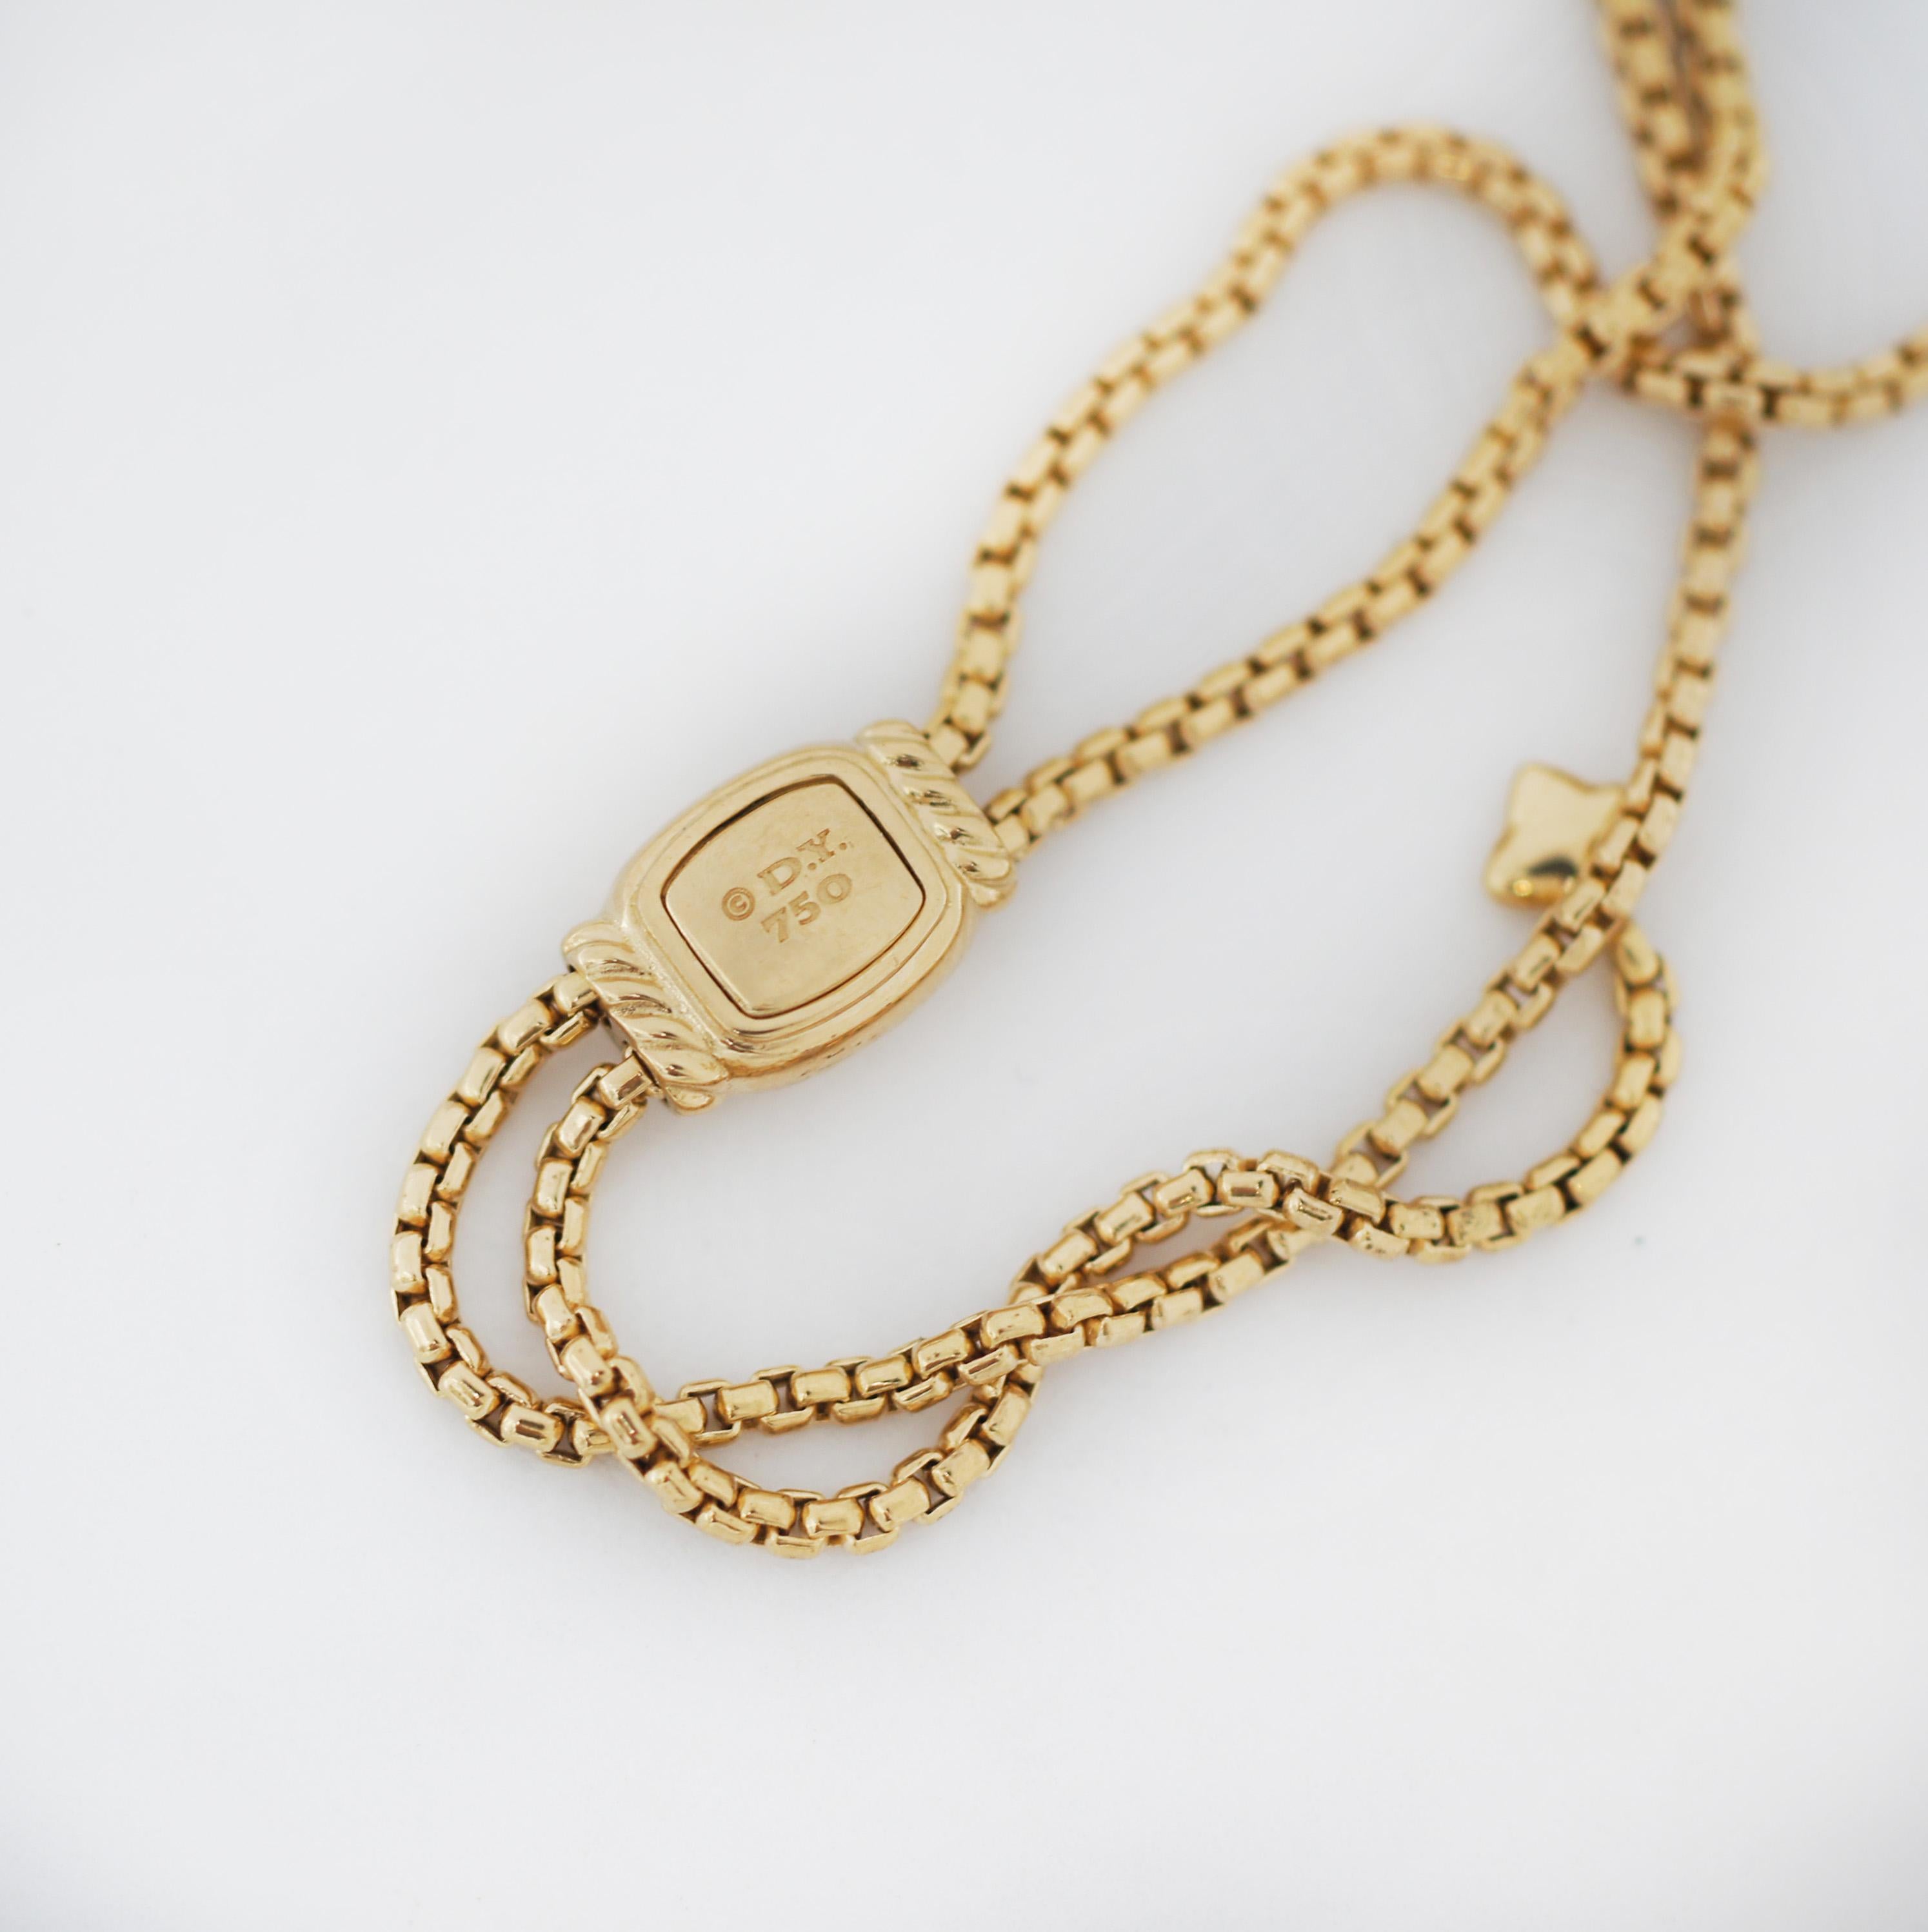 David Yurman 18K Gold Continuance Pendant Necklace In Excellent Condition For Sale In San Fernando, CA